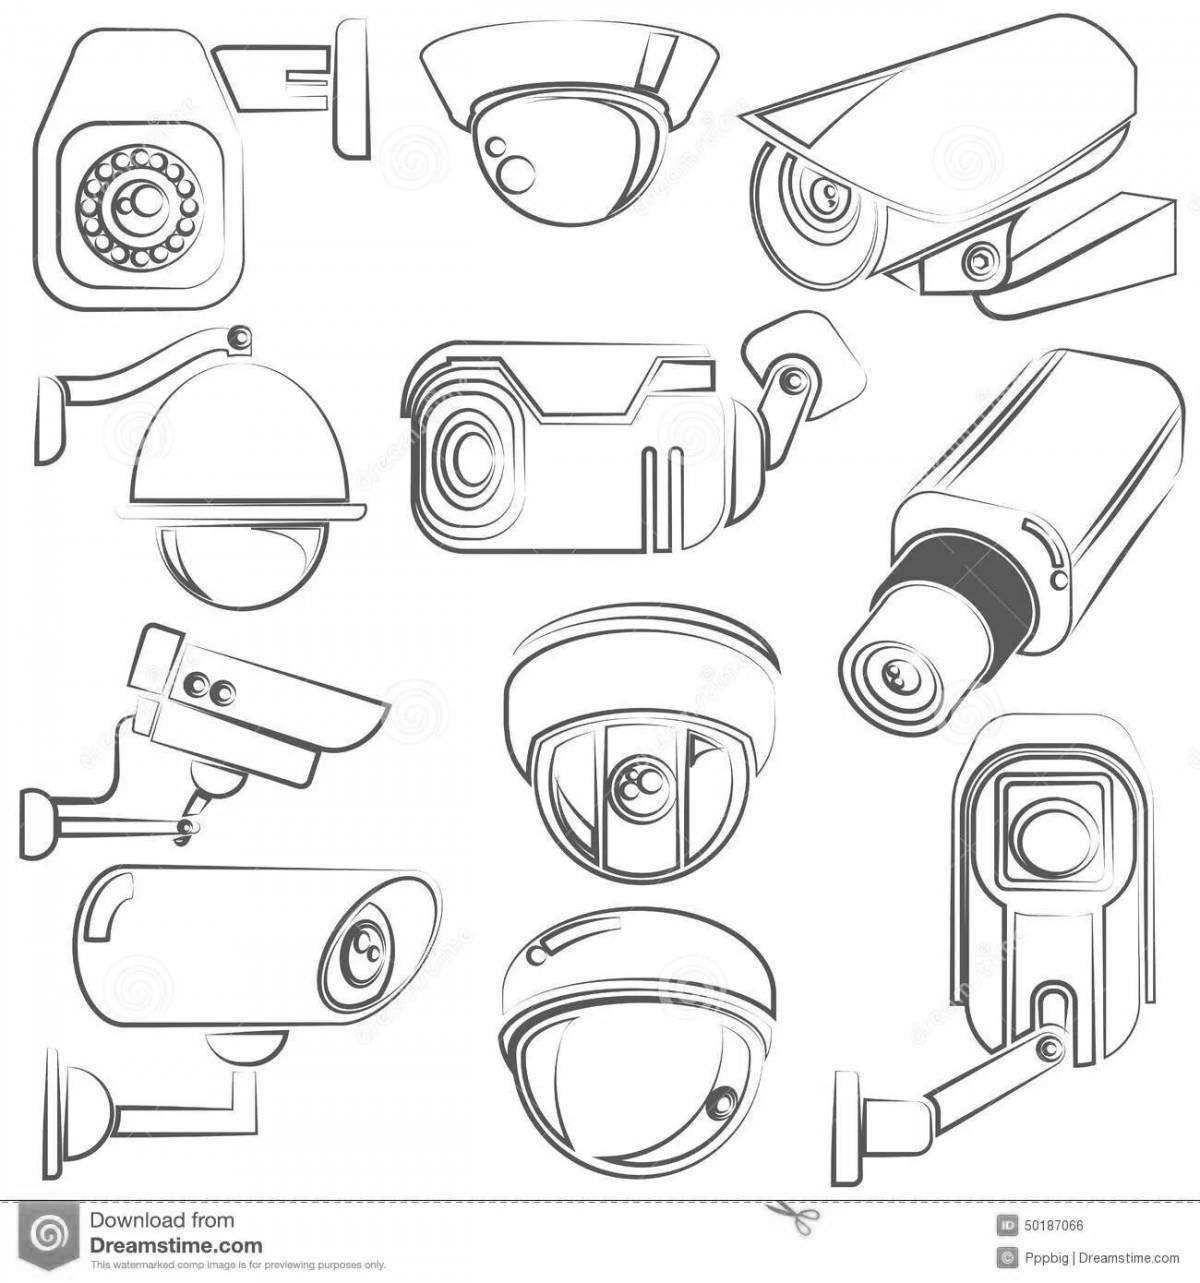 Camcorder coloring page